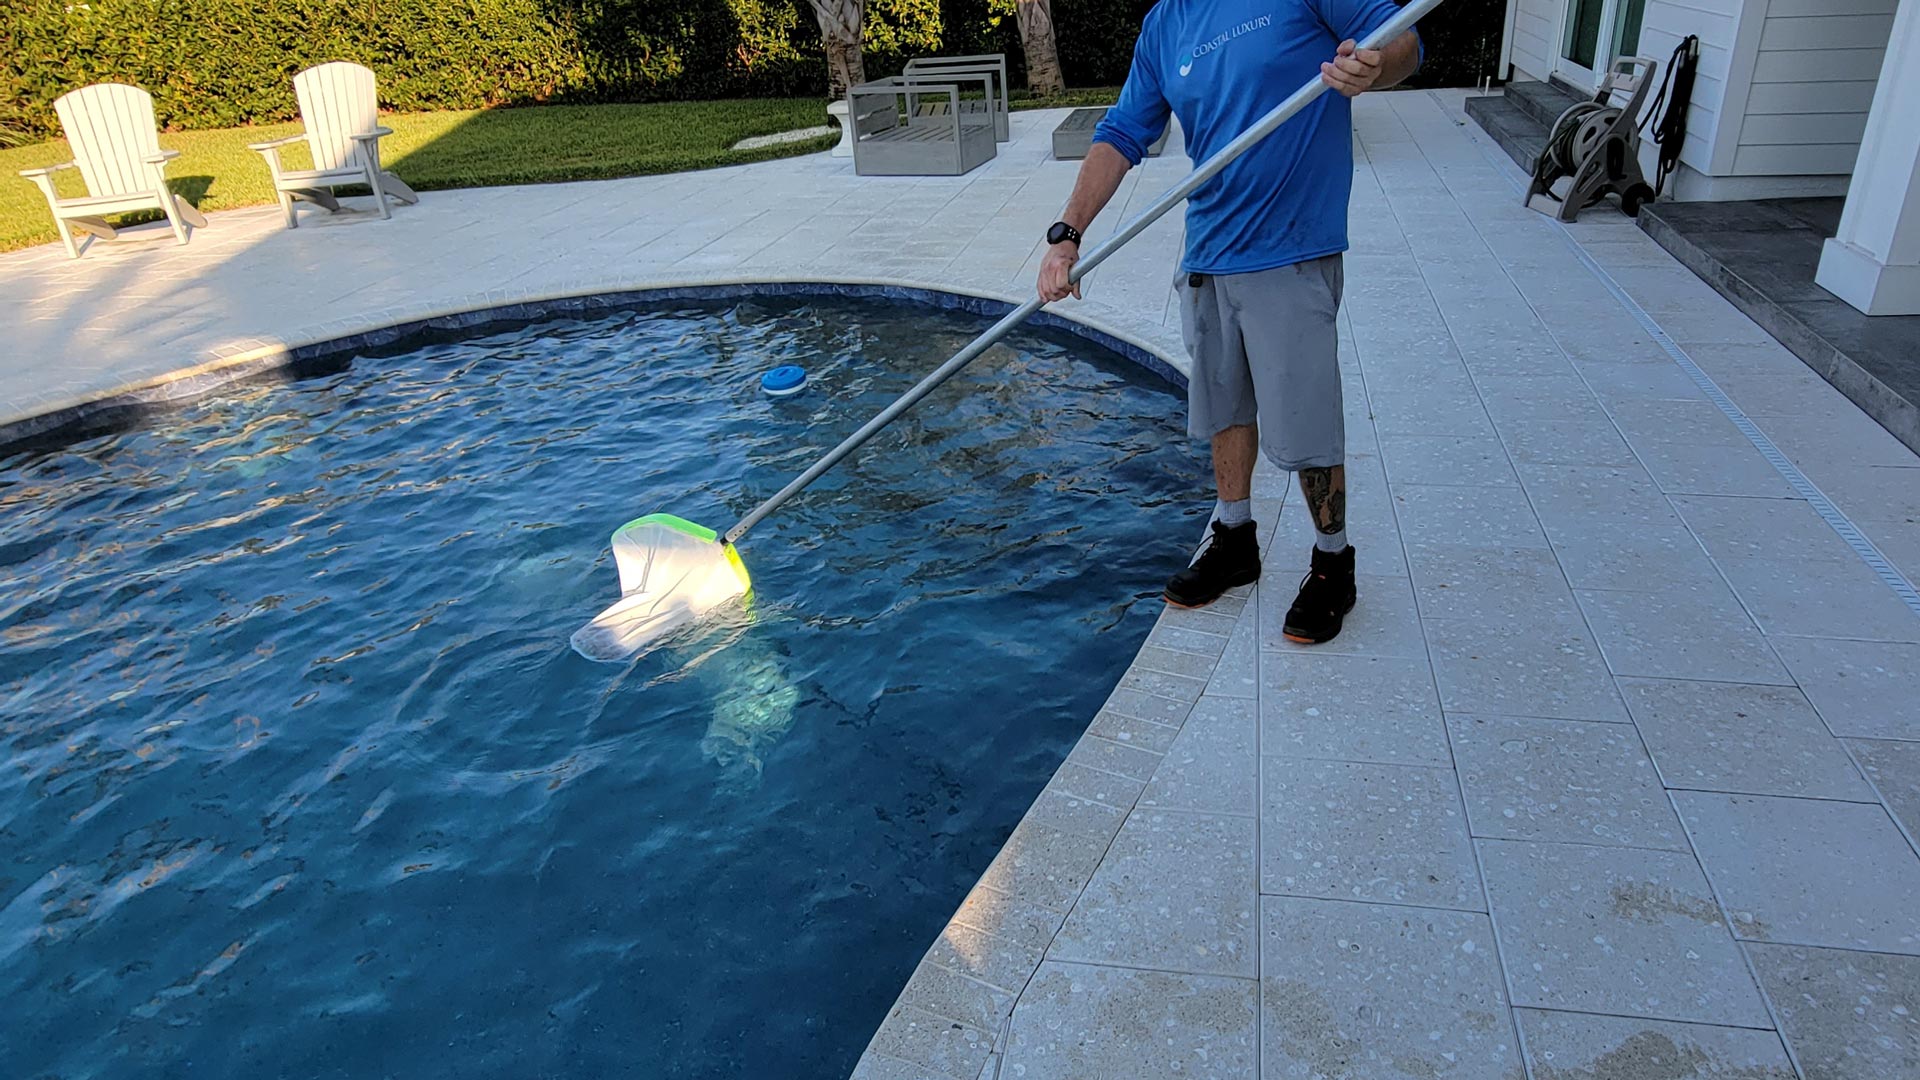 Featured image for “Should You Hire a Pool Service or DIY?”